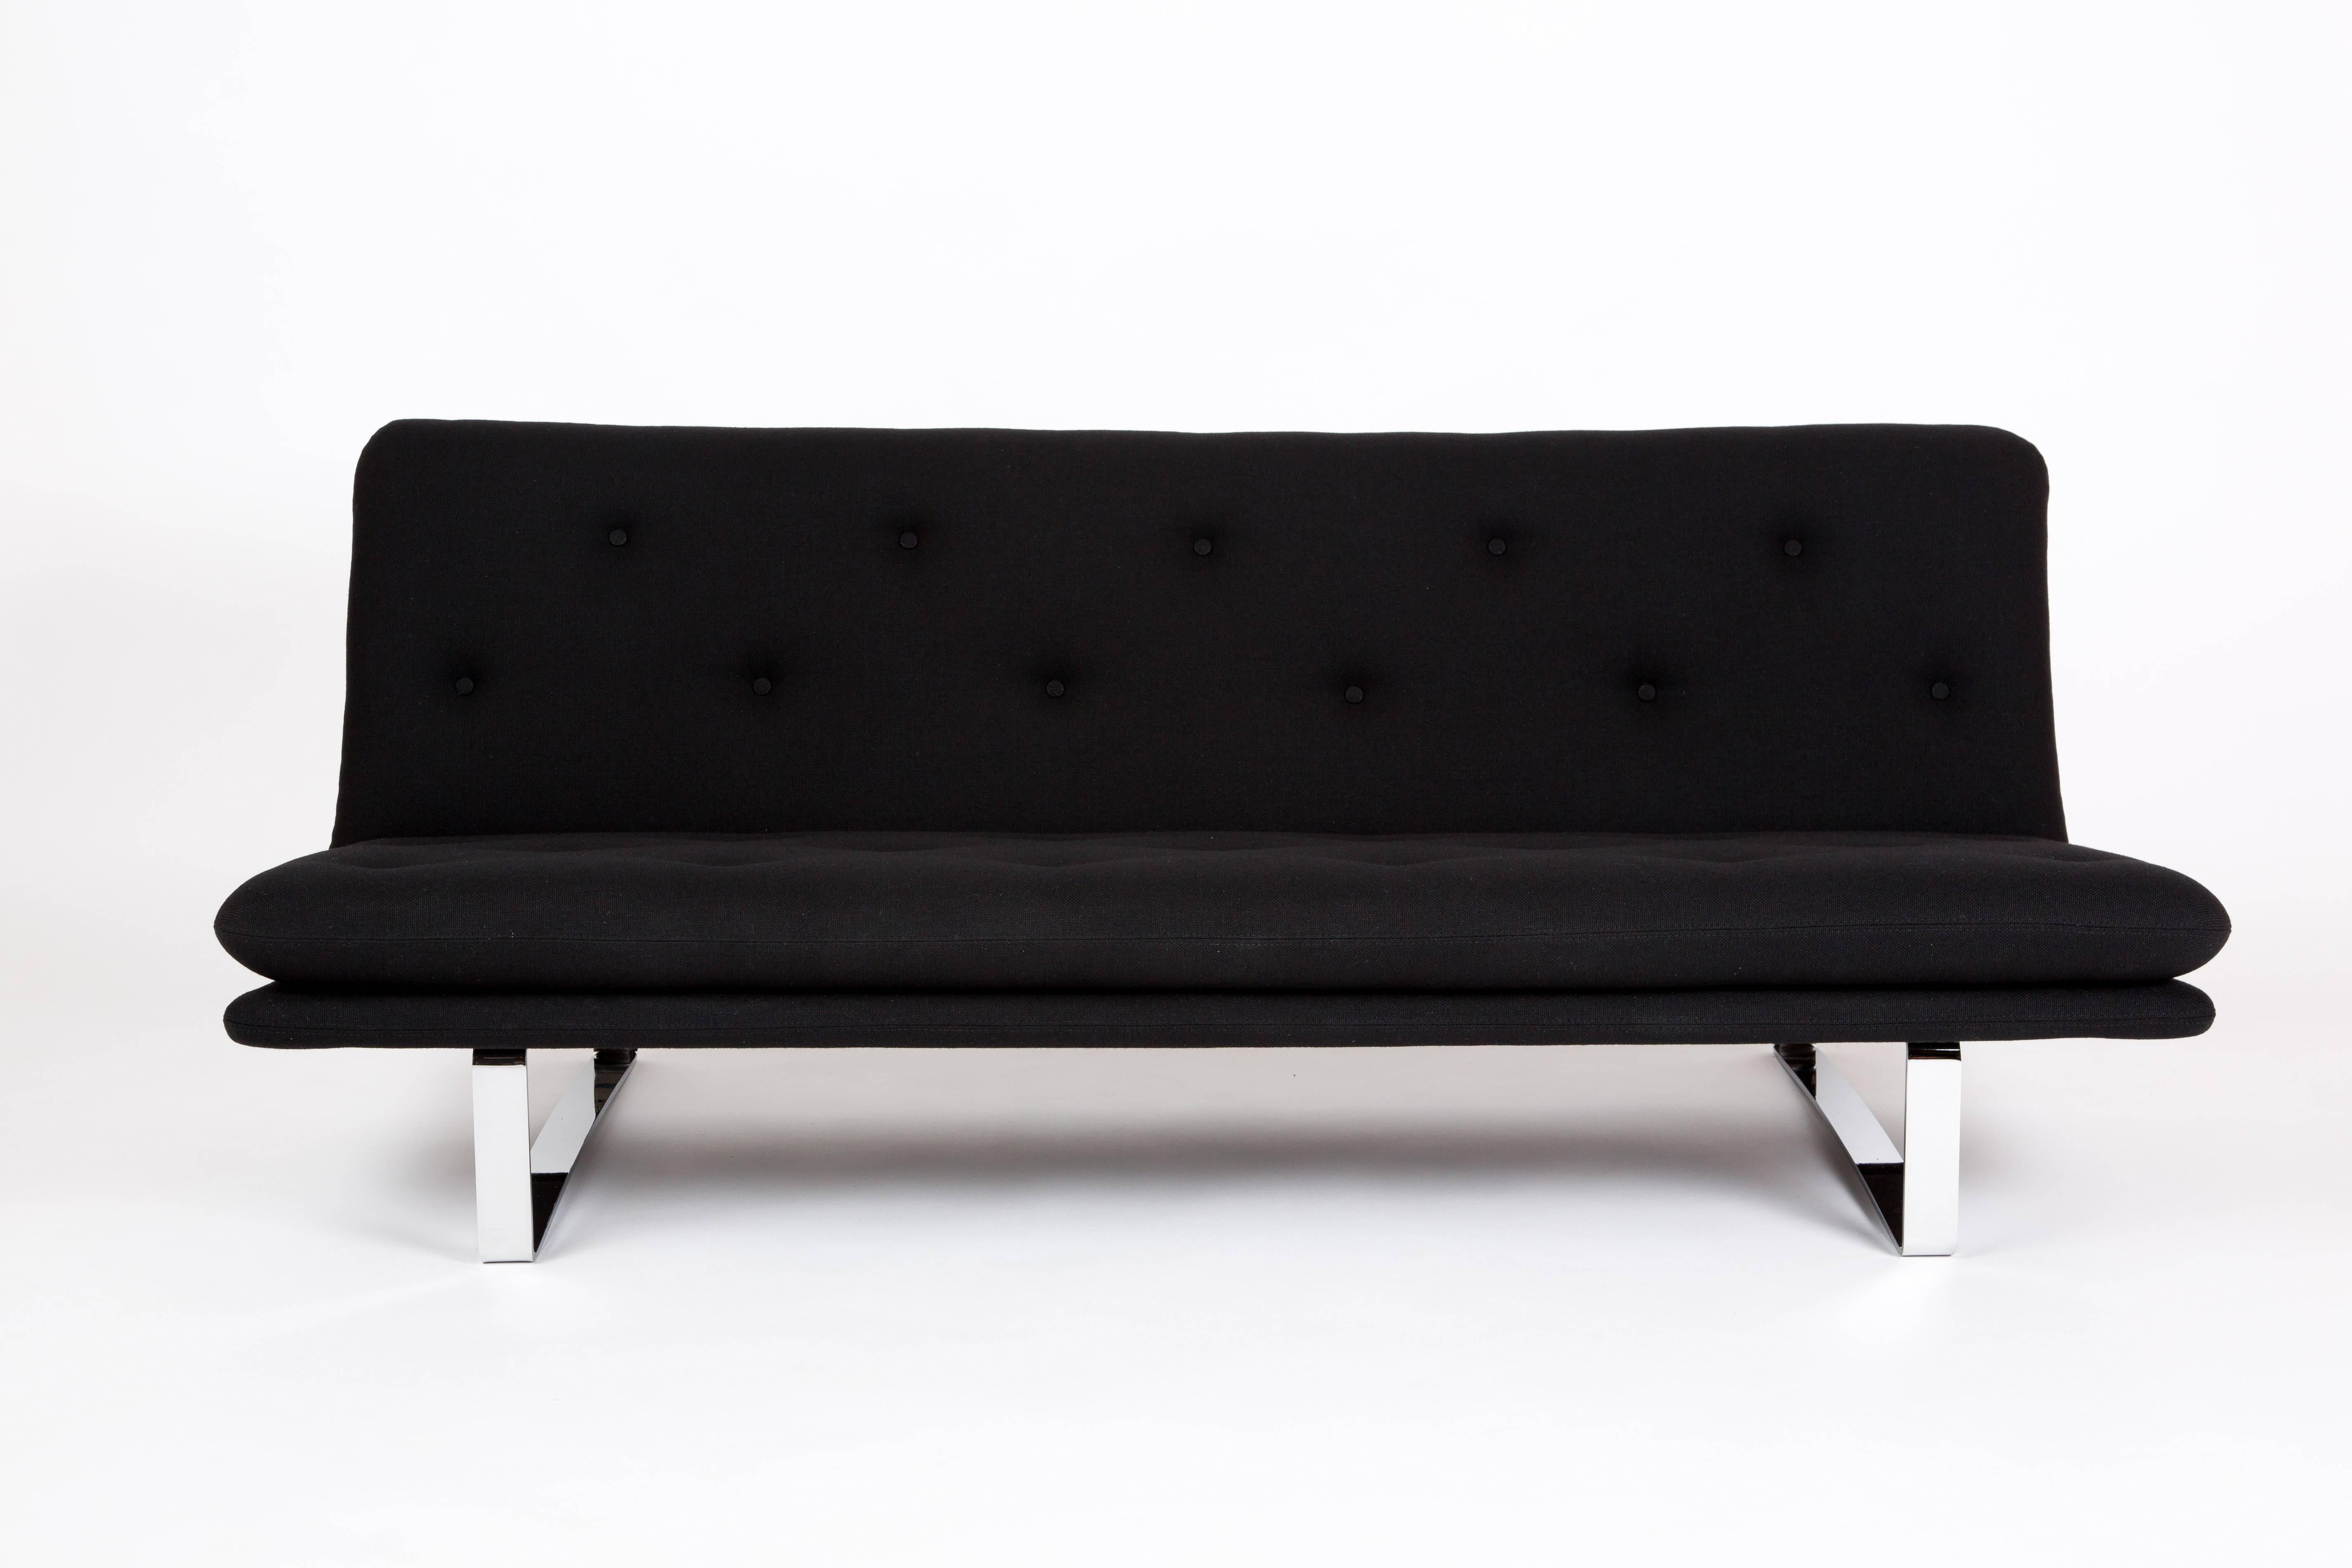 Mid-Century Modern Artifort Sofa with Chrome-Plated Legs, by Kho Liang Ie, C 683, Black Fabric